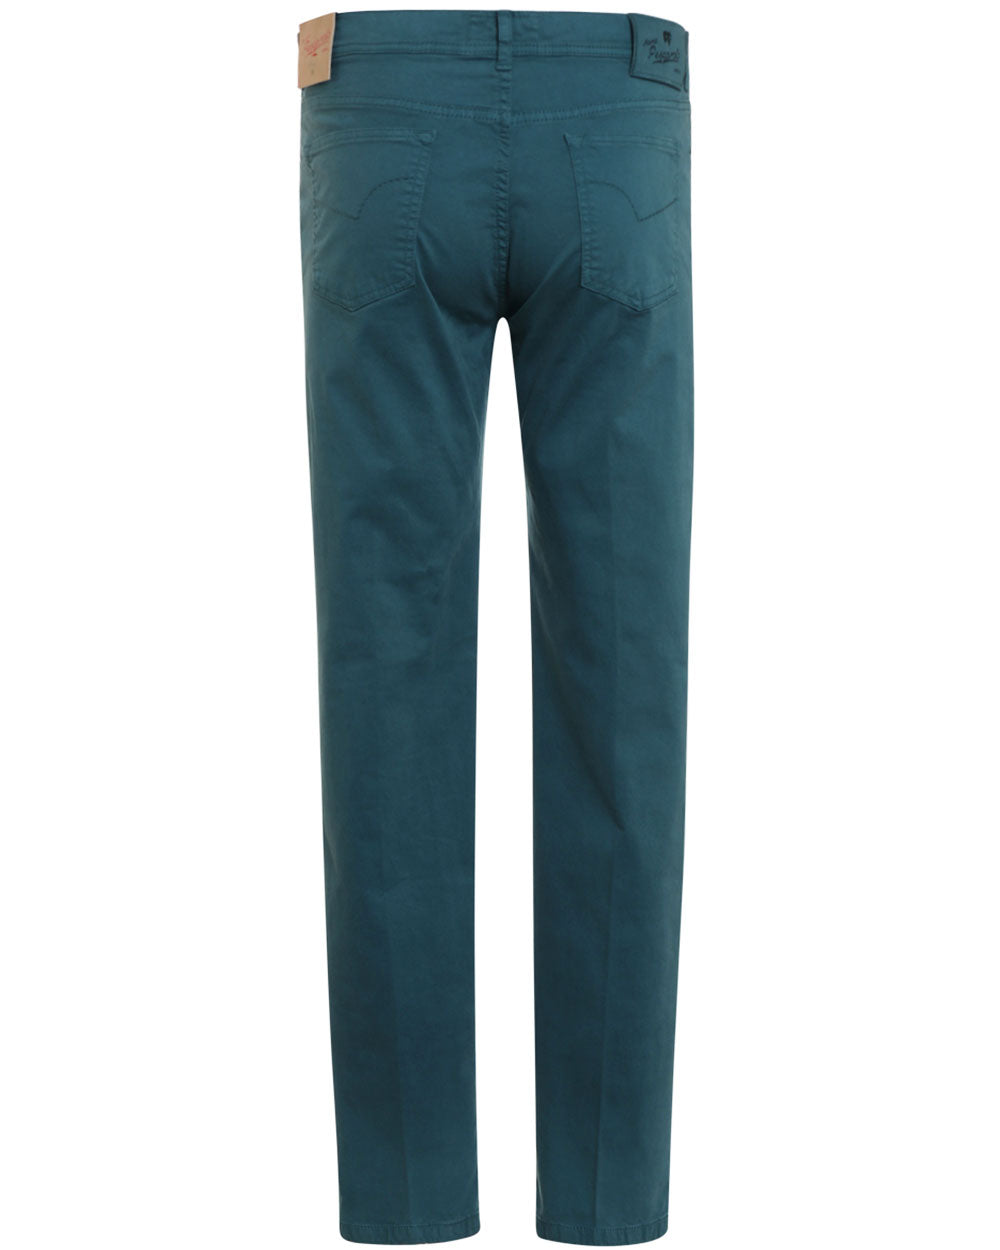 Emerald Green Sueded Supima Cotton Casual Pant